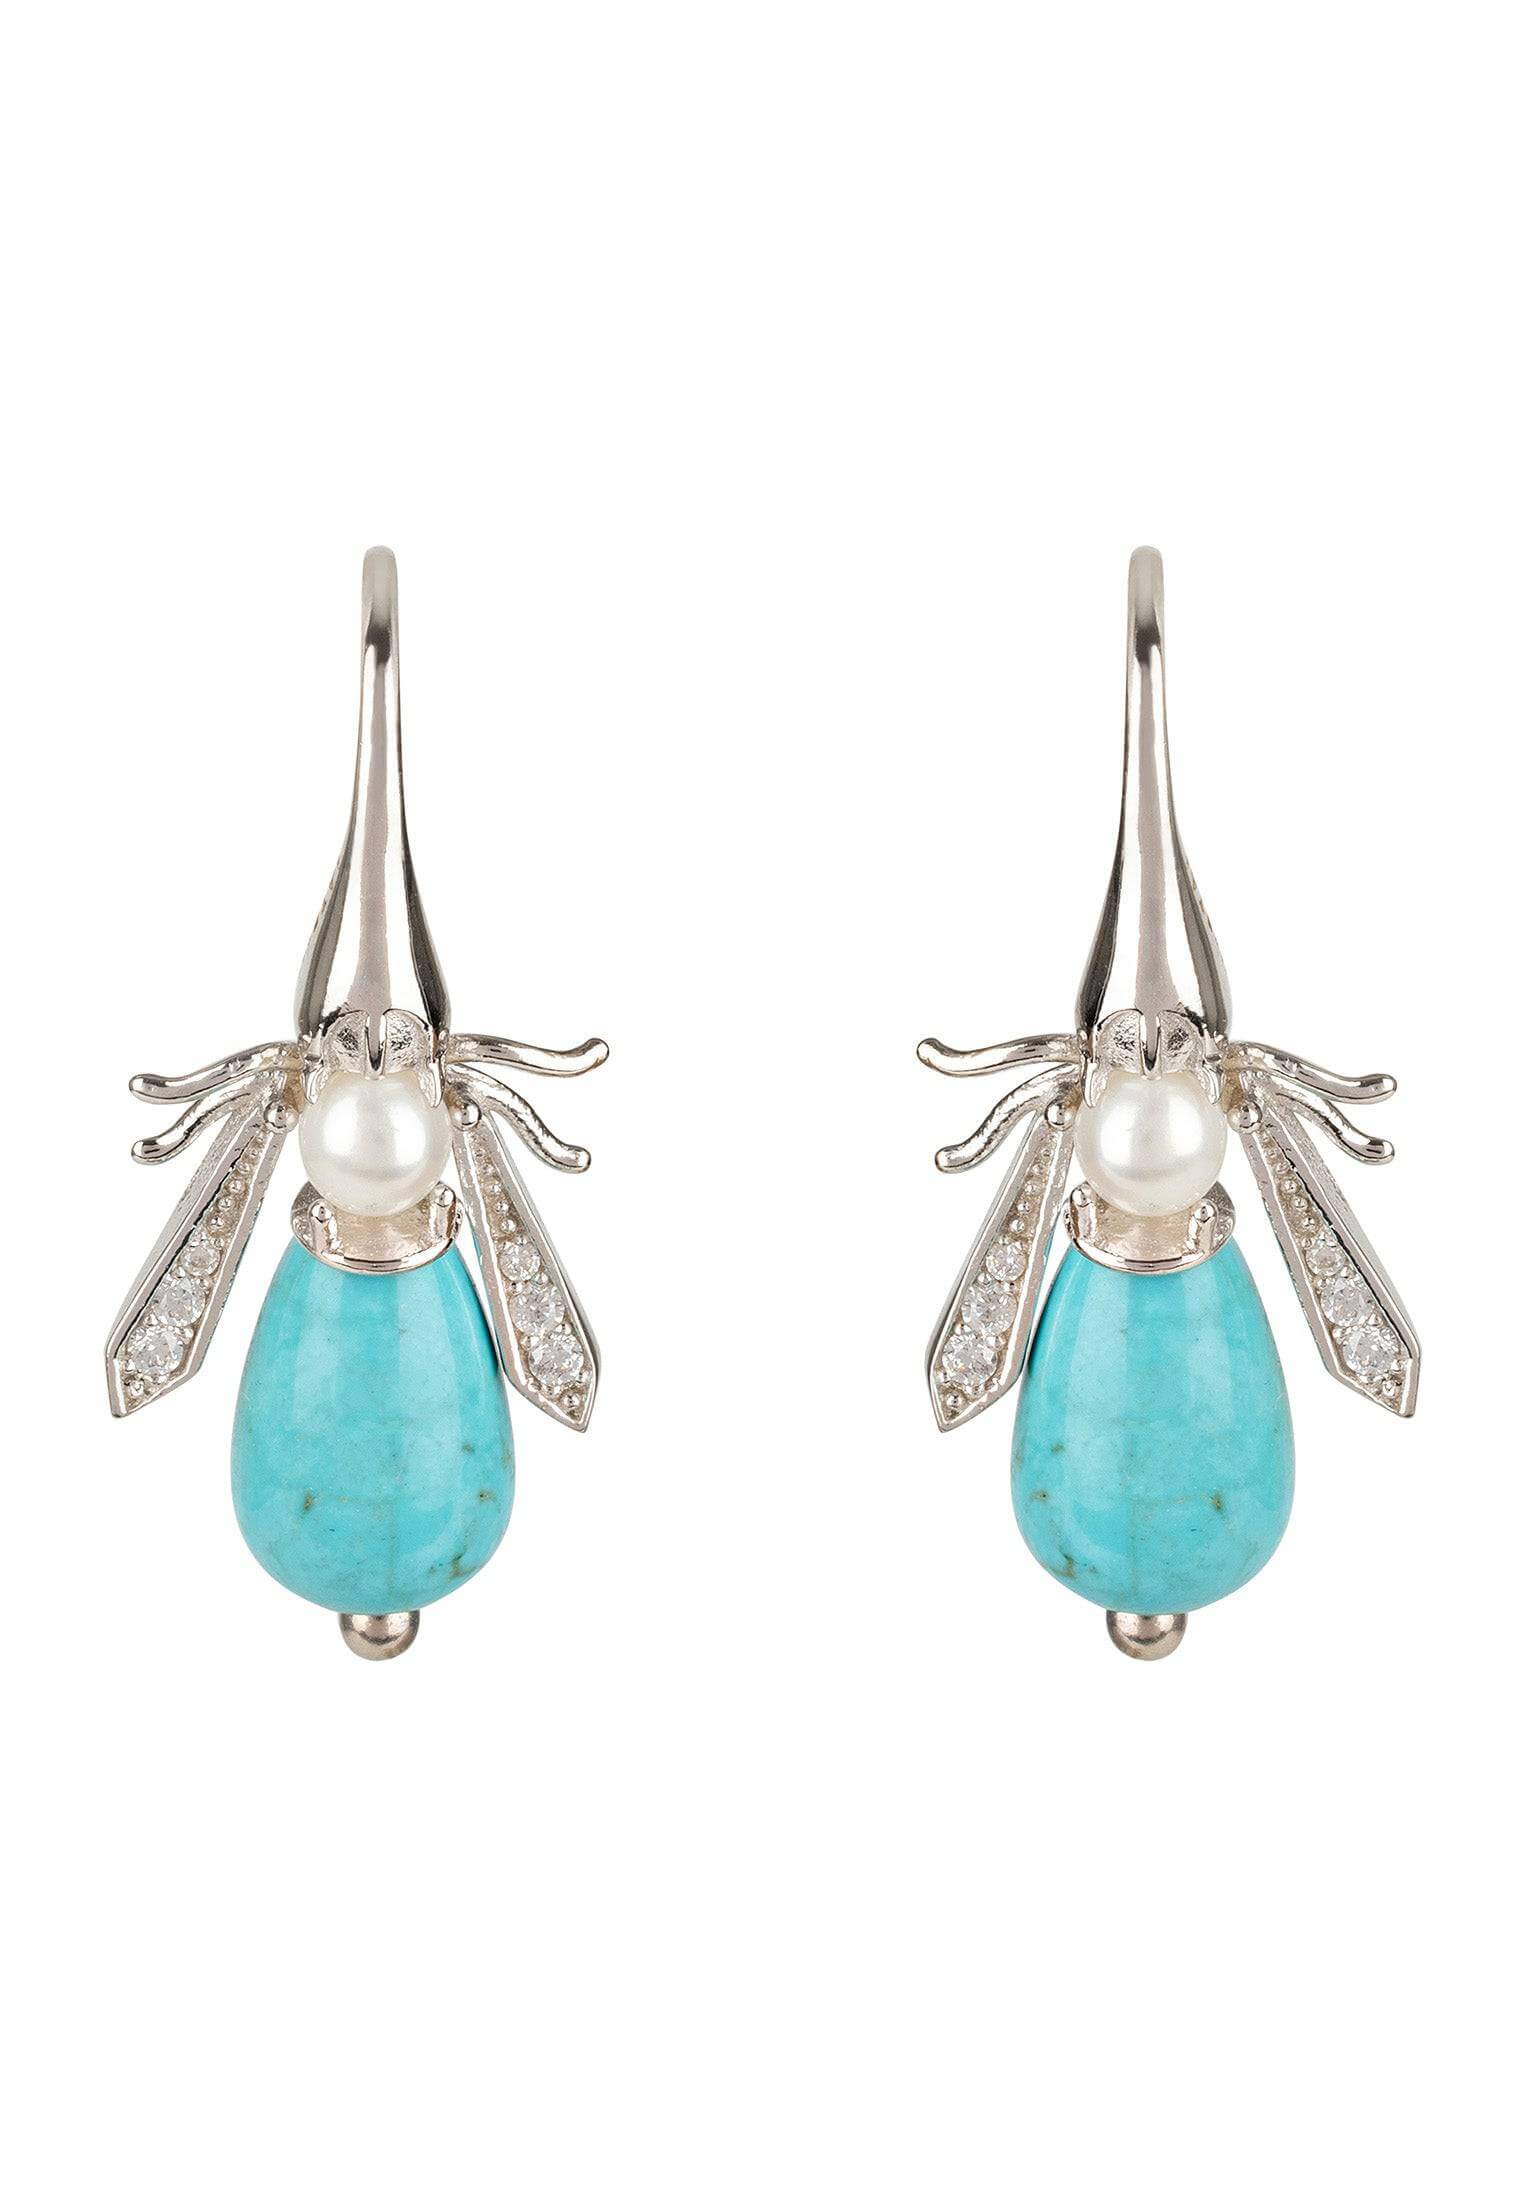 Turquoise And Freshwater Pearl Honey Bee Earrings Silver - Twelve Silver Trees